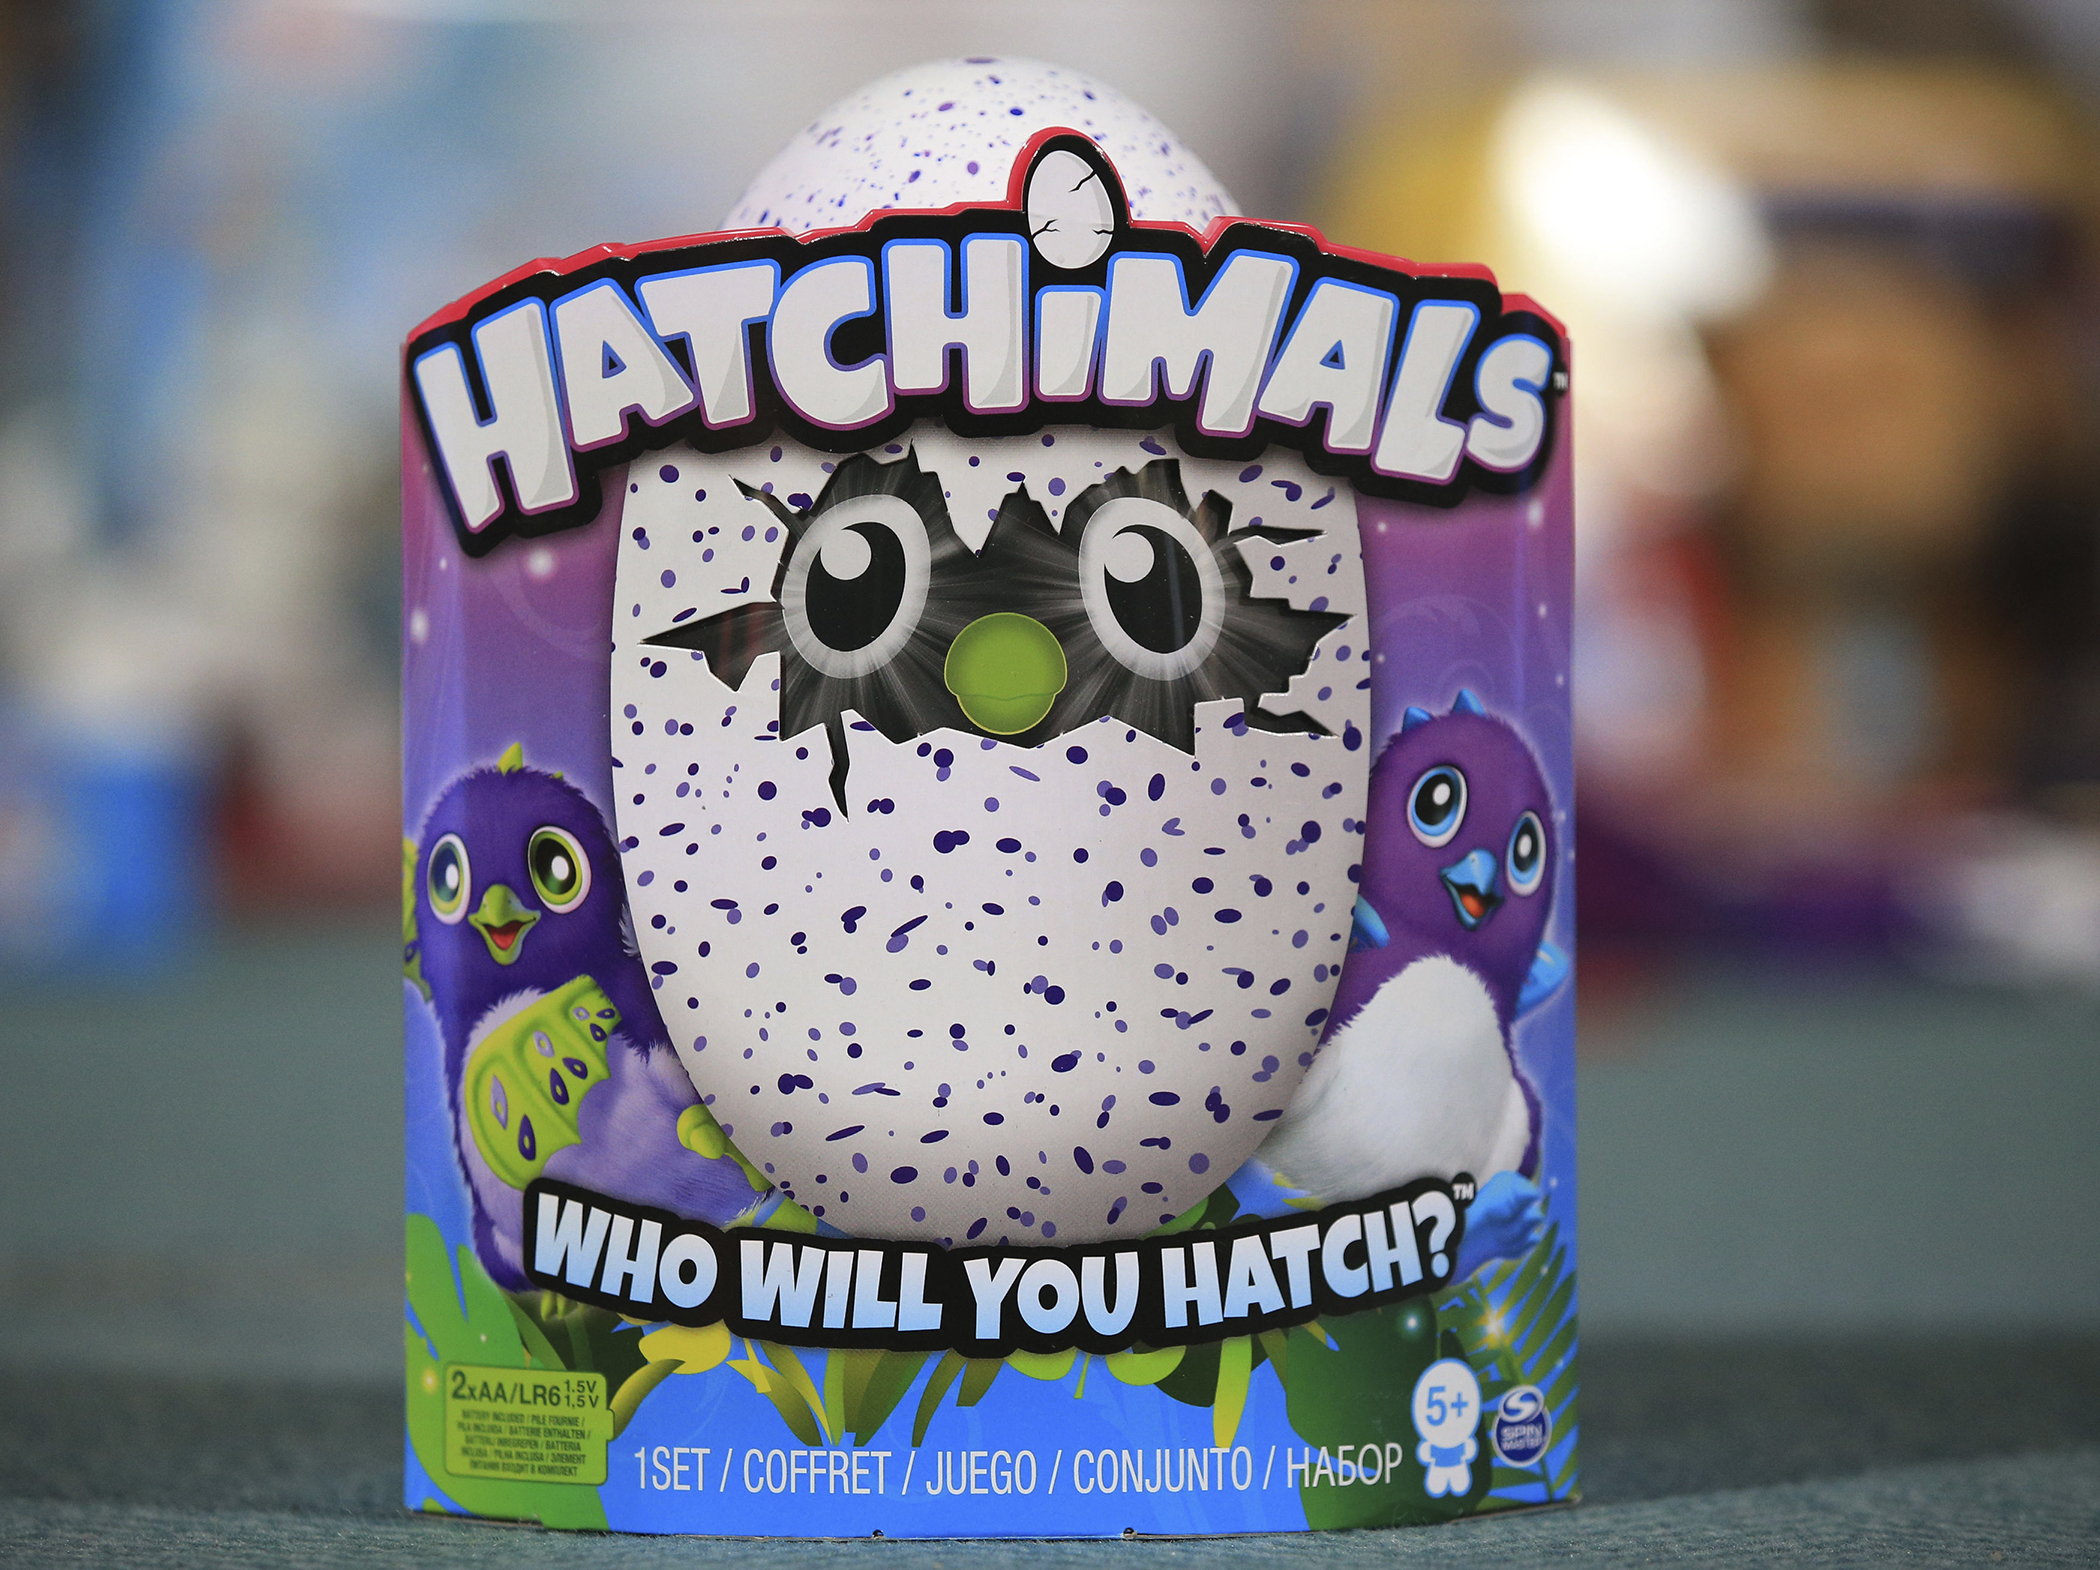 A Woman Whose Hatchimal Didn’t Hatch Is Suing the Toy’s Maker